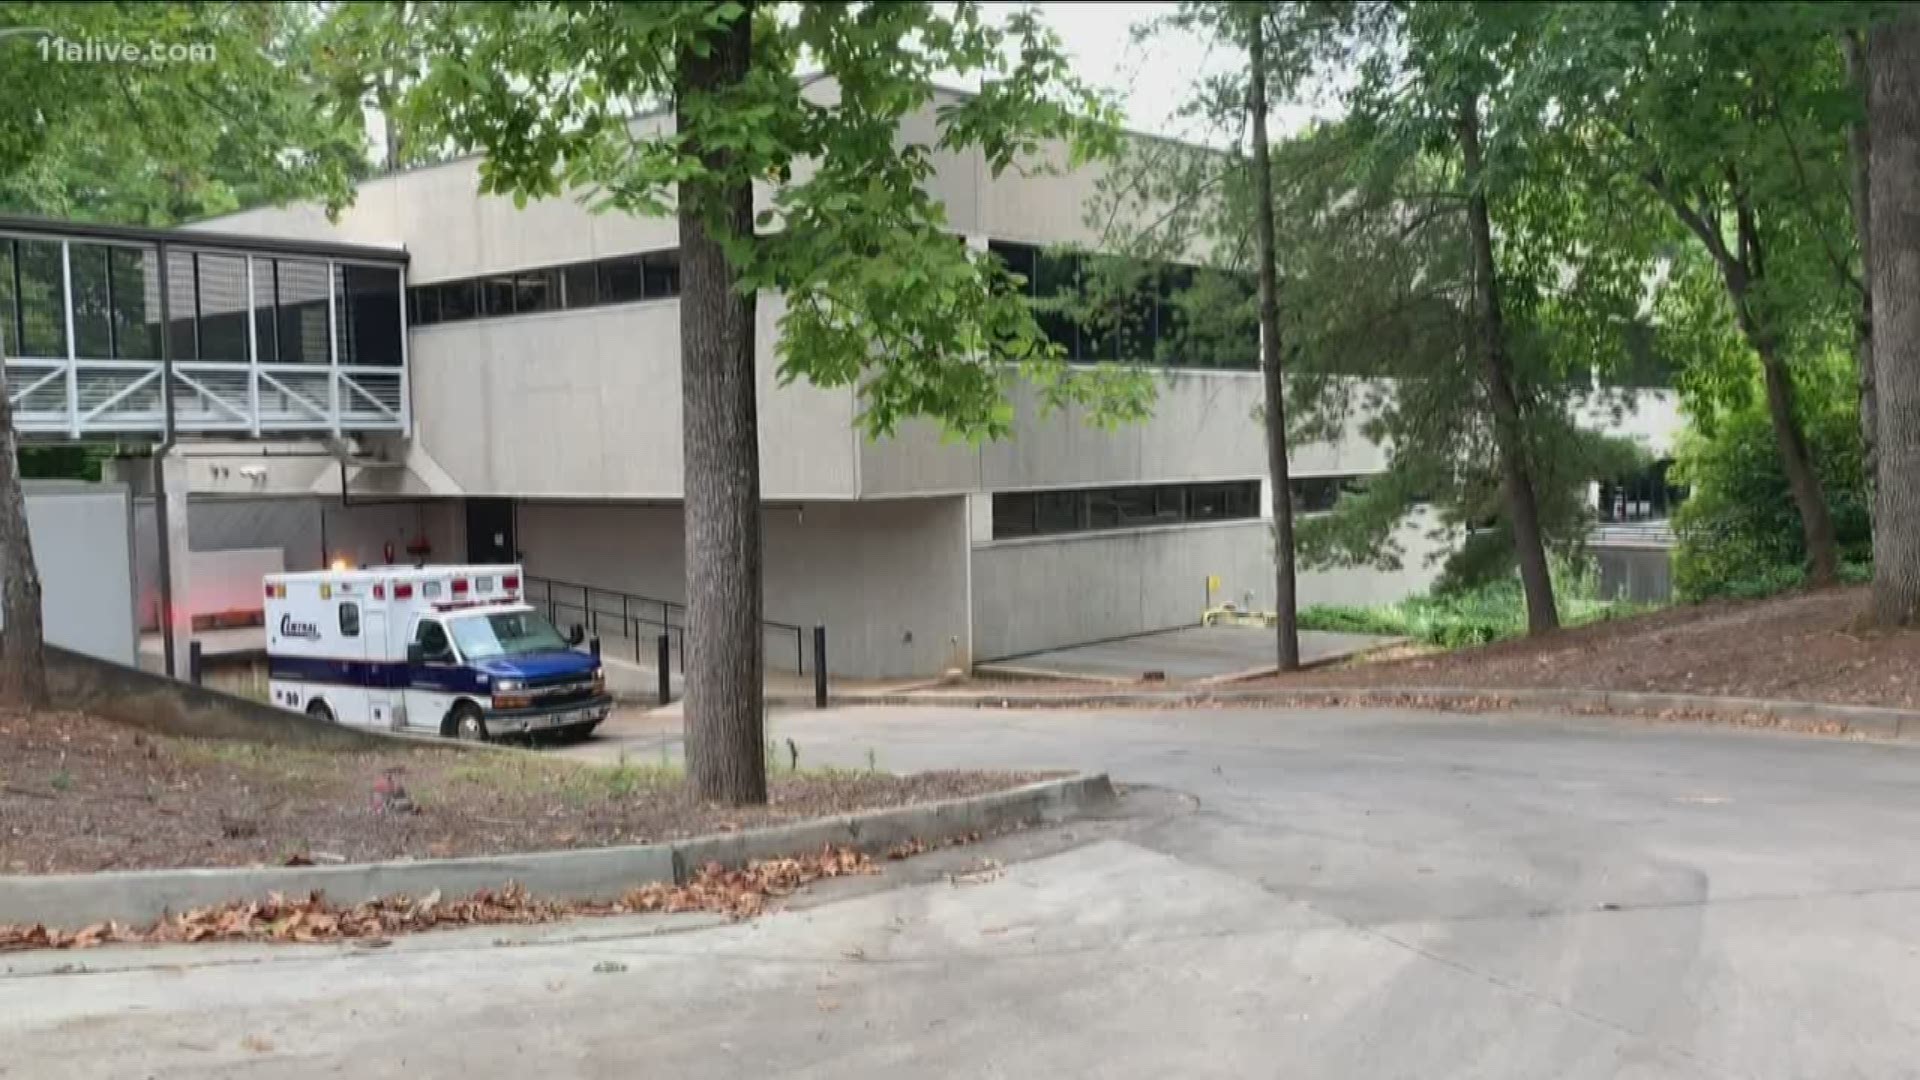 Gwinnett Police tell 11Alive that a 56-year-old Suwanee man has died following his time at Lakeview Behavioral Health in Norcross.